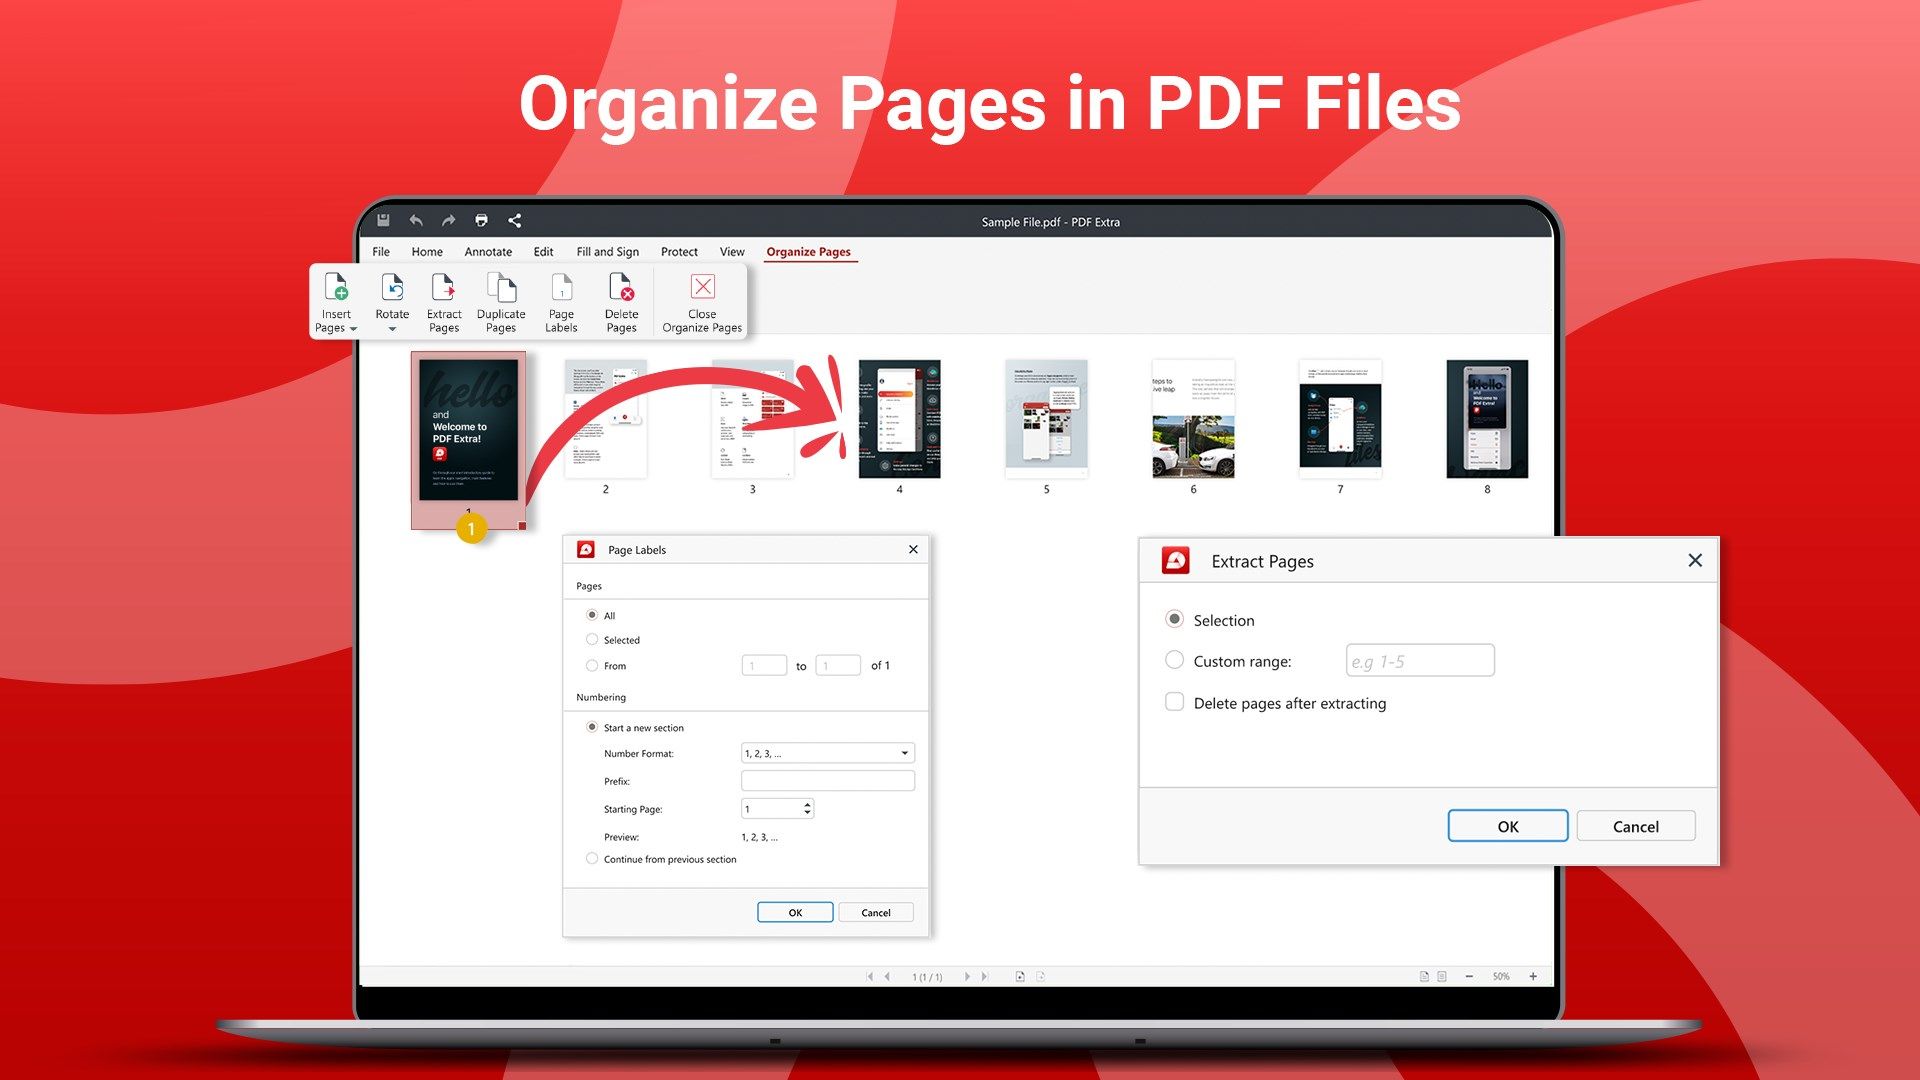 Arrange PDFs any way you want via simple drag & drop controls and quickly preview the content as you go. Insert empty pages, pages from another file, or even clipboard images. Make duplicates and remove empty pages and other irrelevant content in a flash. Extract pages to a blank PDF and instantly start working on your new project. Go the extra mile and combine your PDFs together into one seamless work of art.